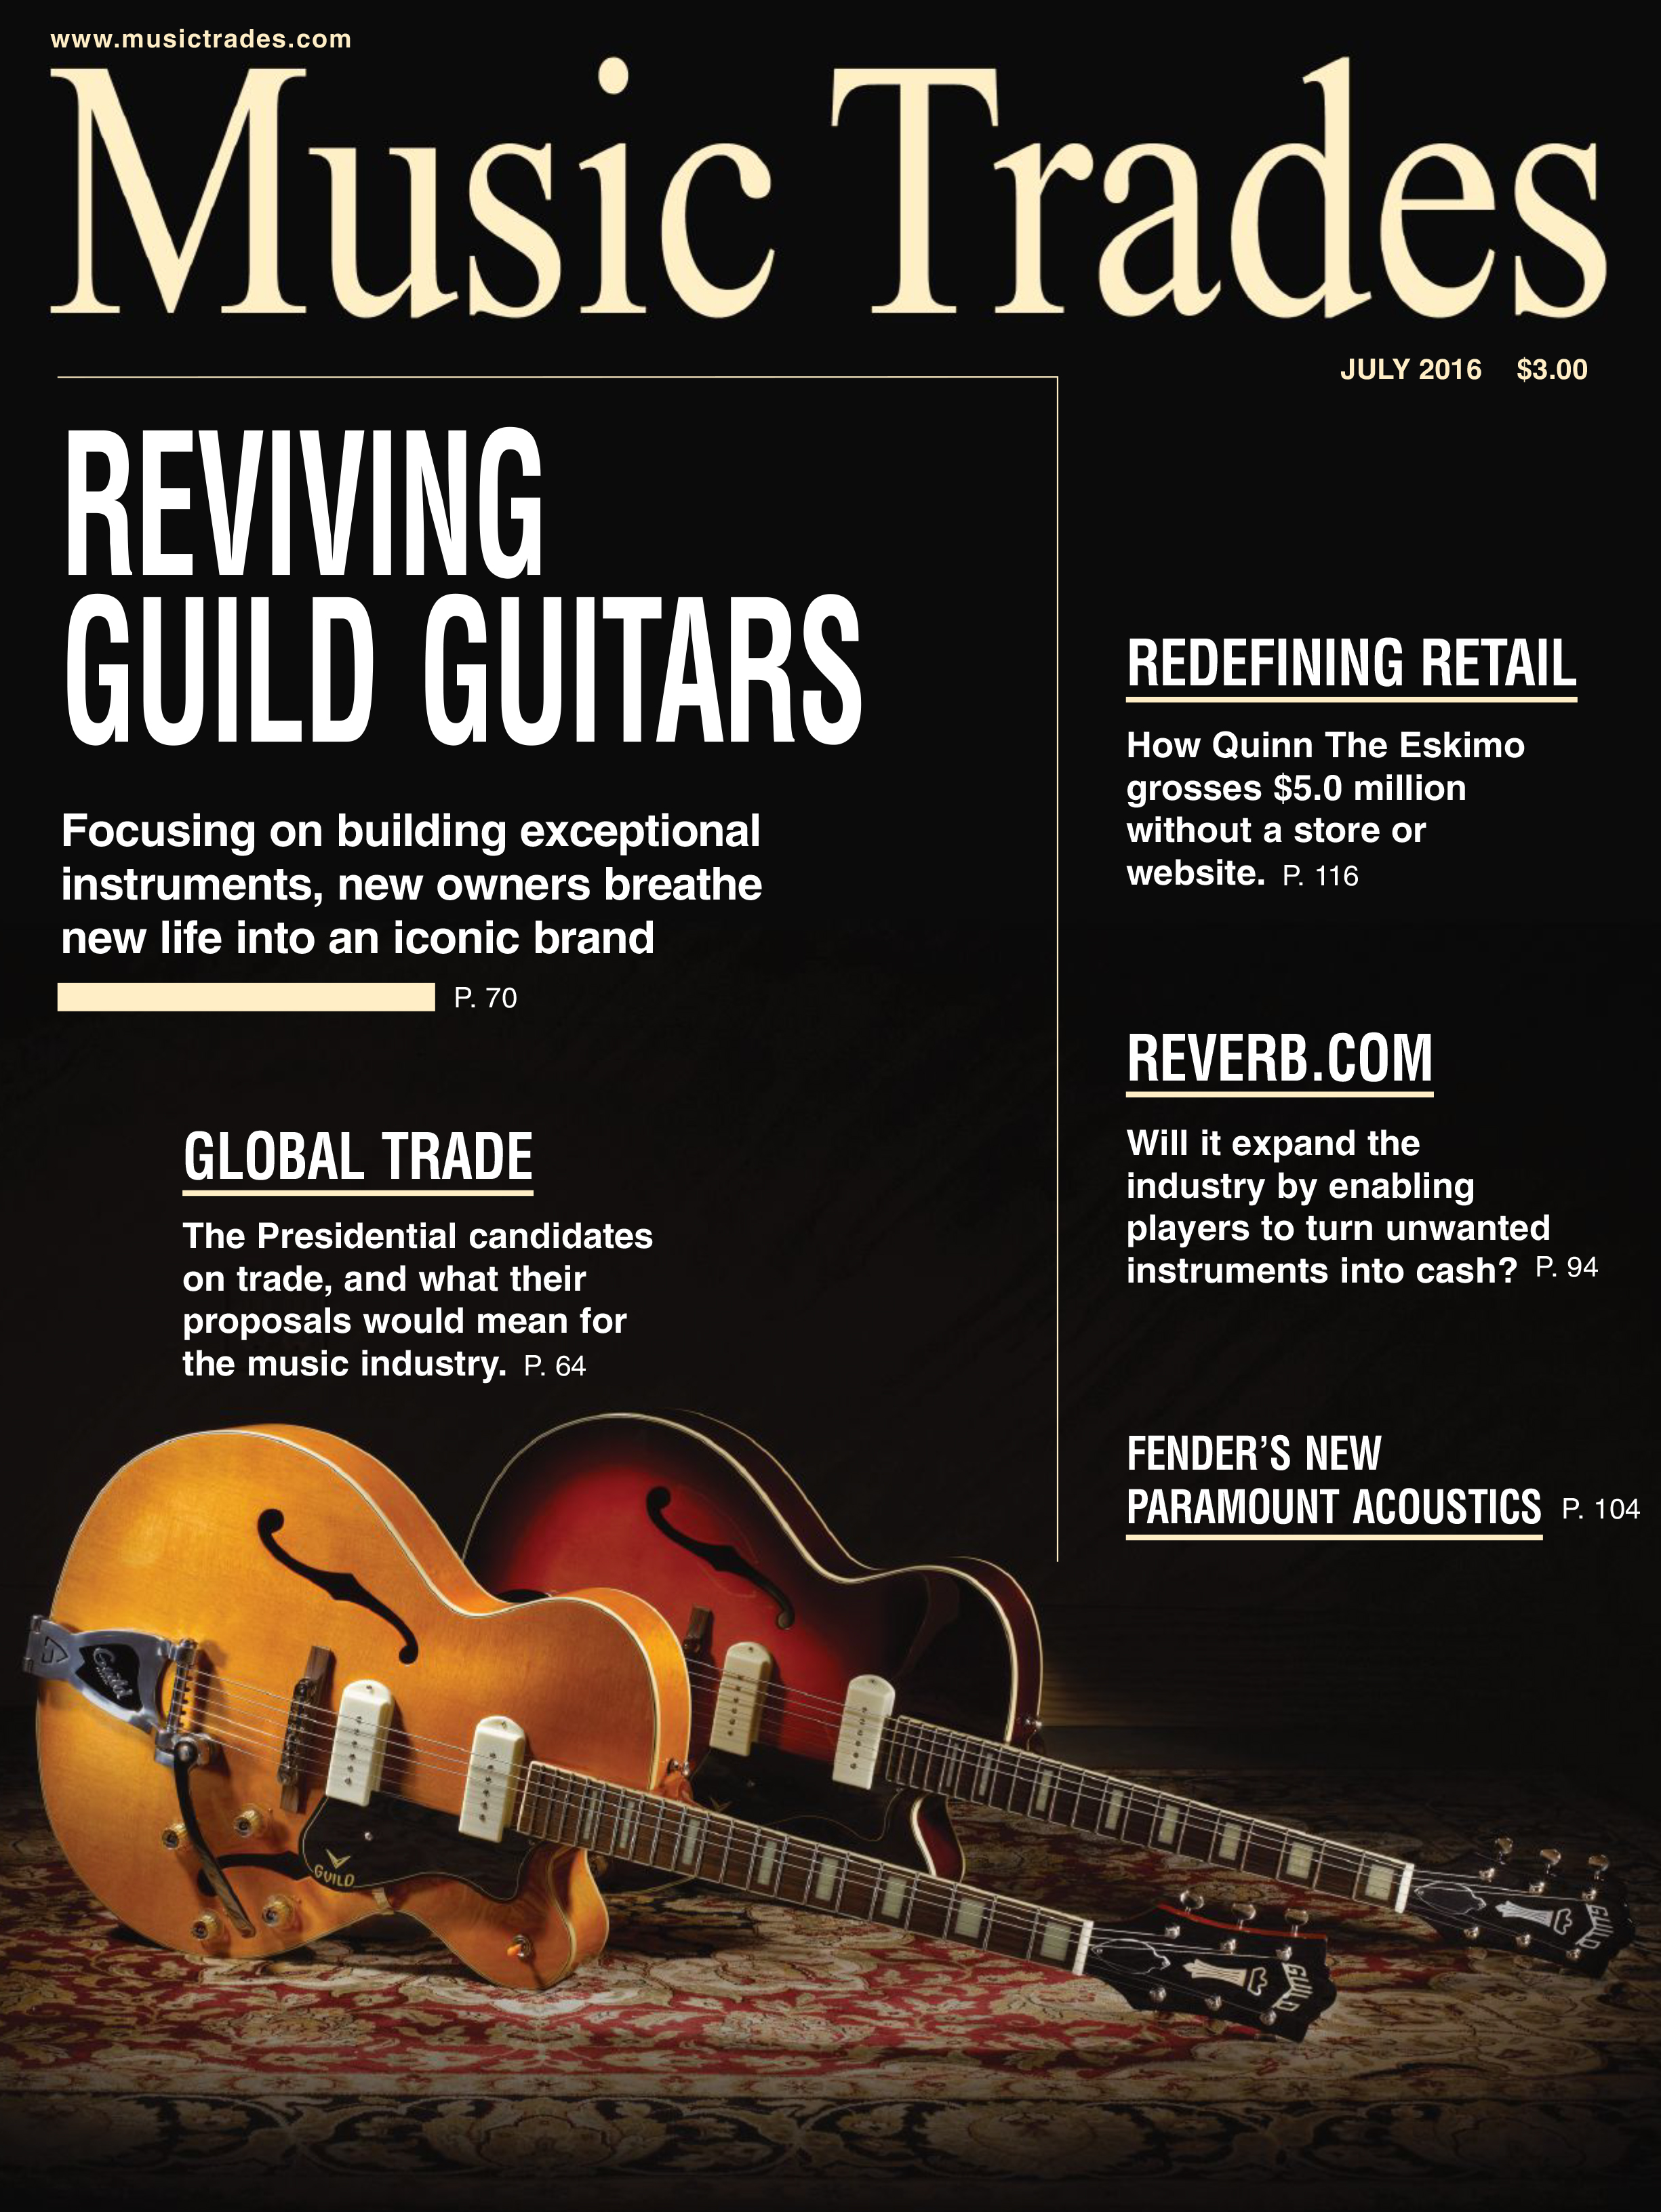 musictrades_july2016_guild_coverstory-1